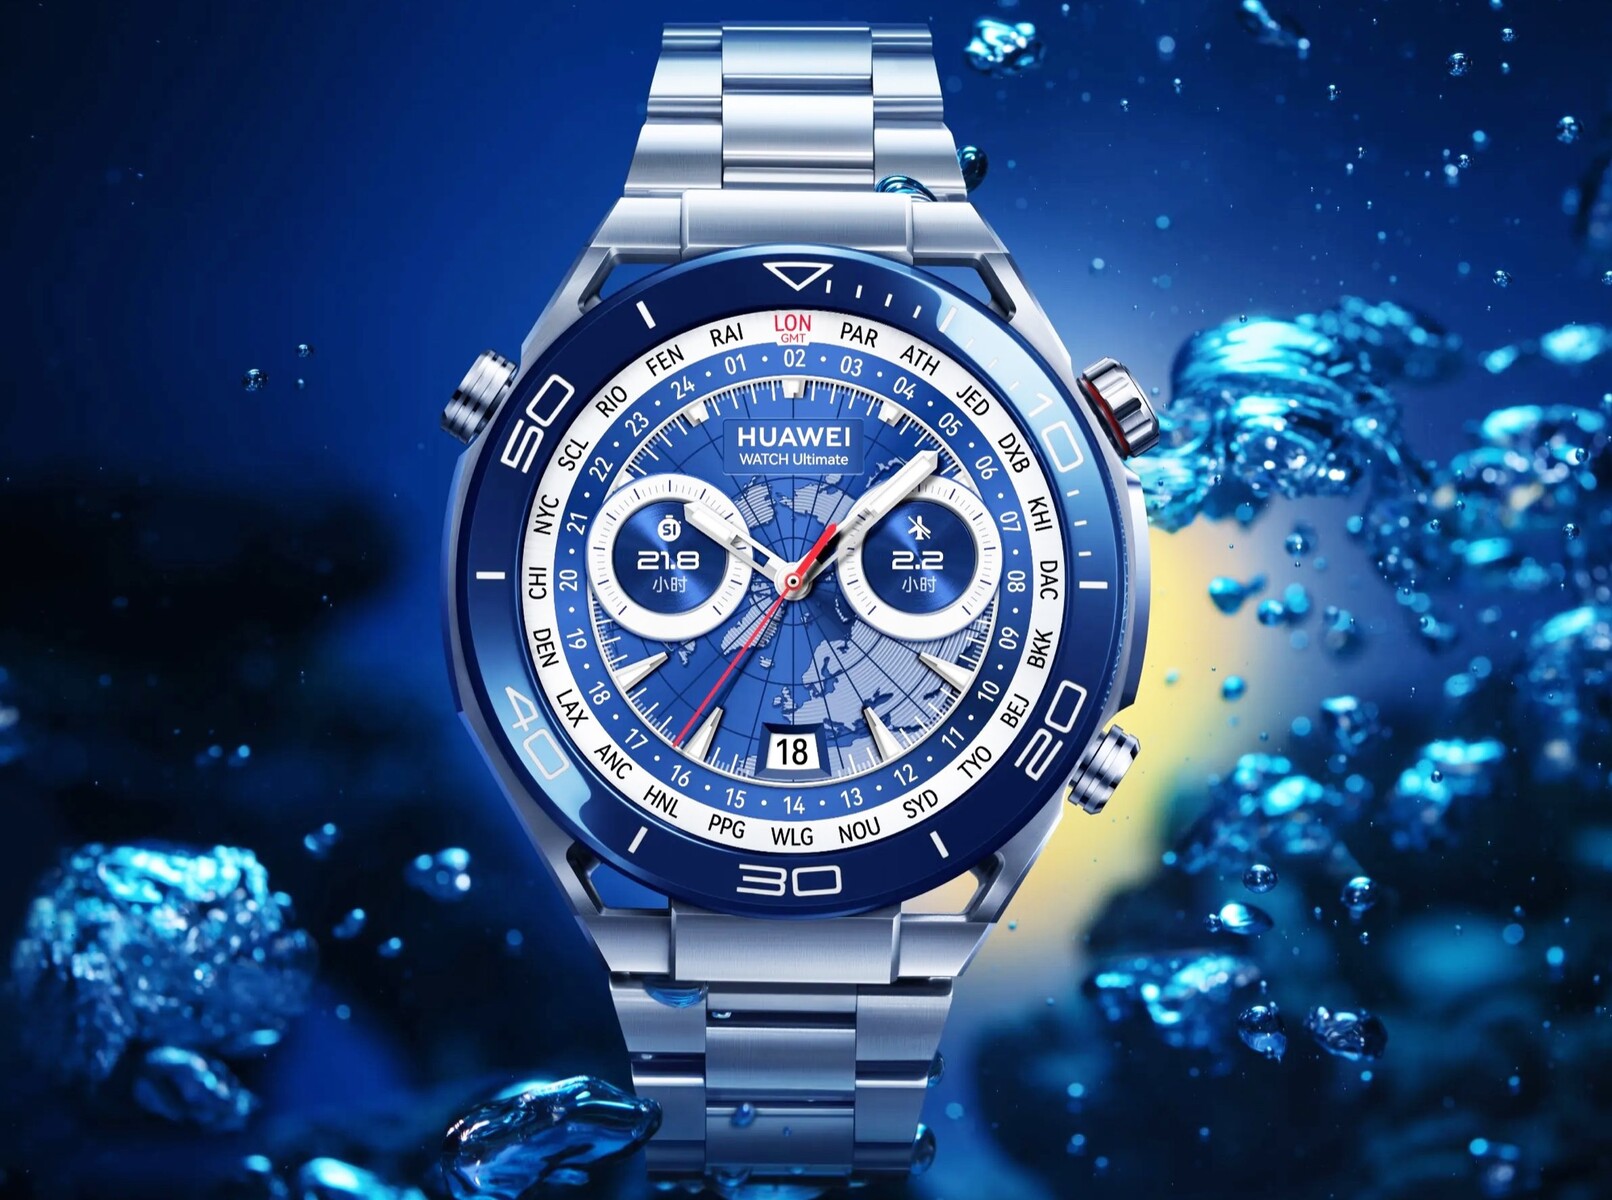 When the global release of the Huawei Watch Ultimate will take place